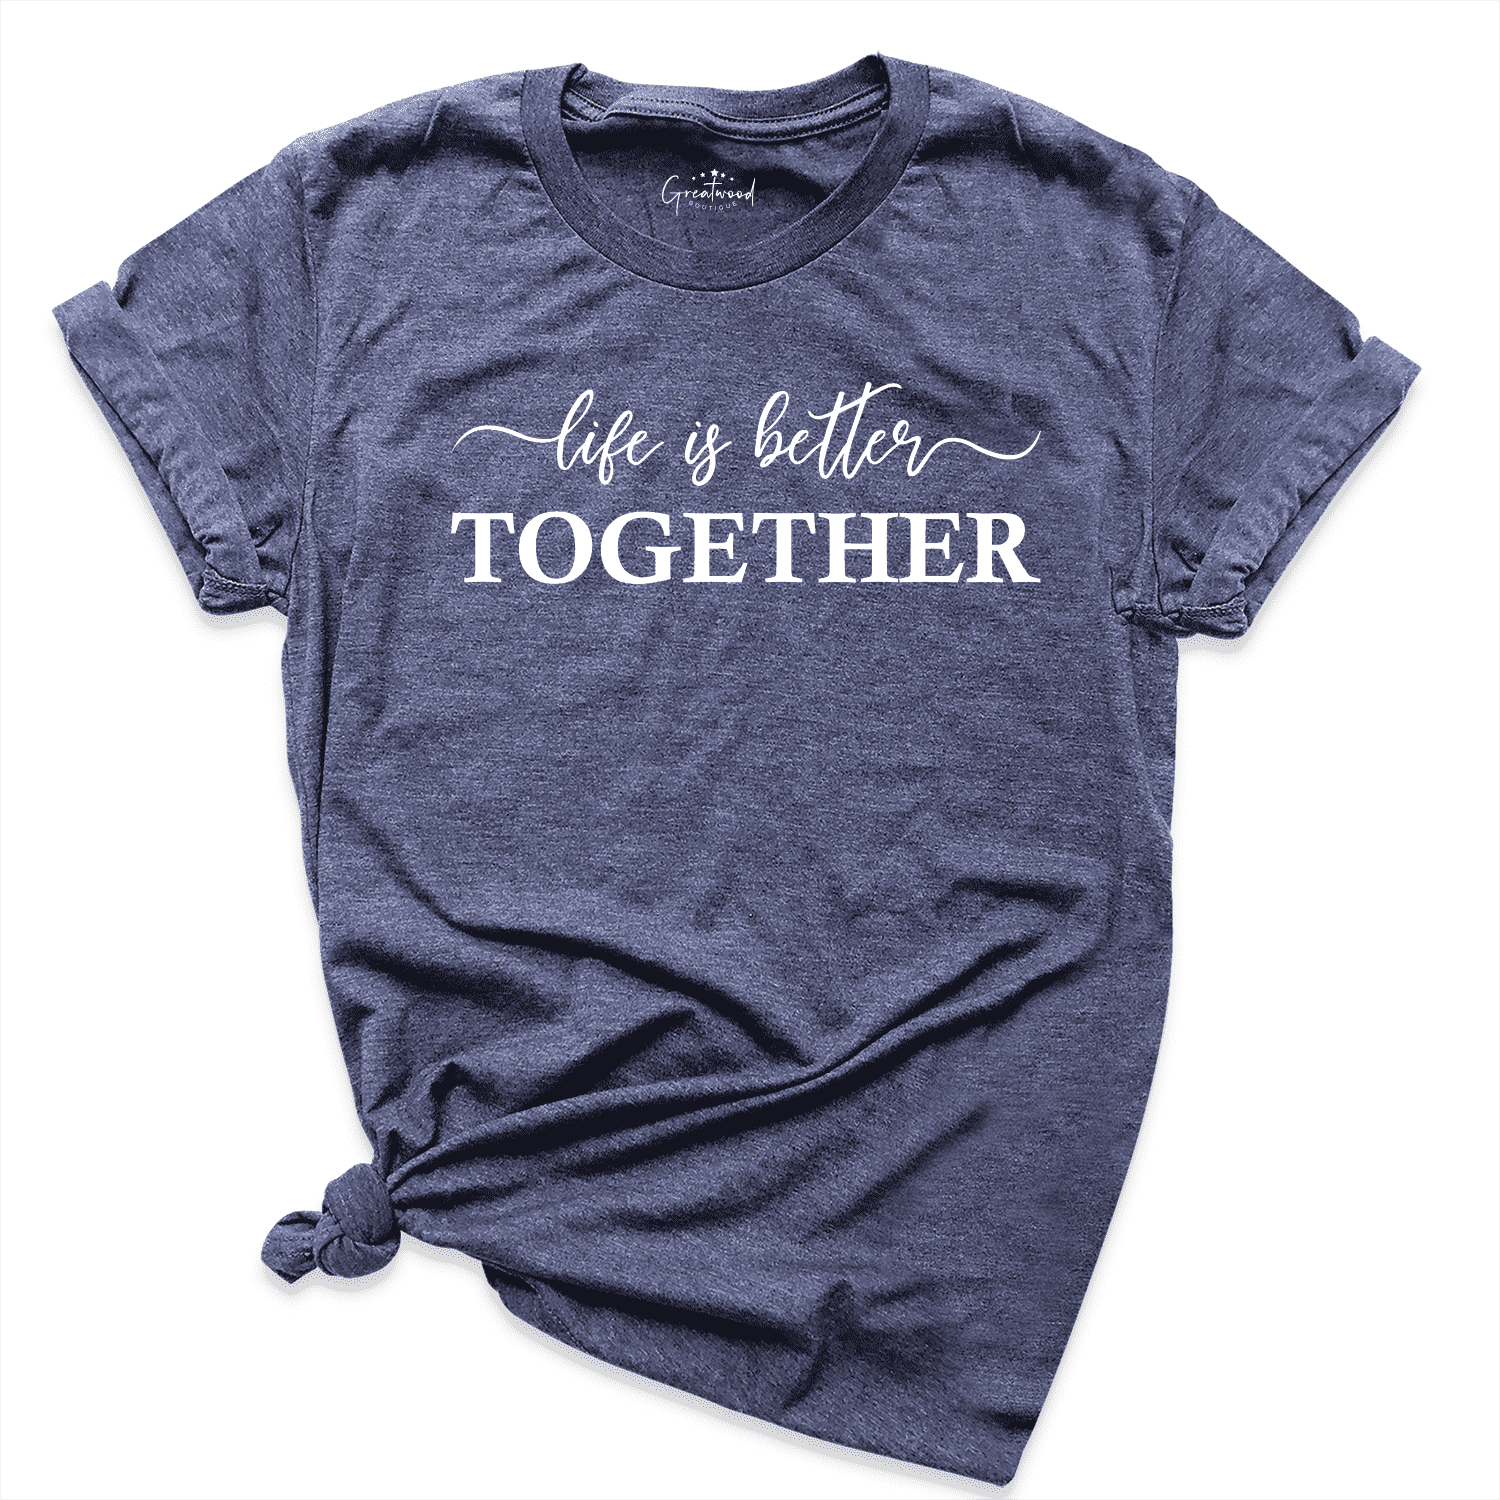 Life is Better Together Shirt Navy - Greatwood Boutique